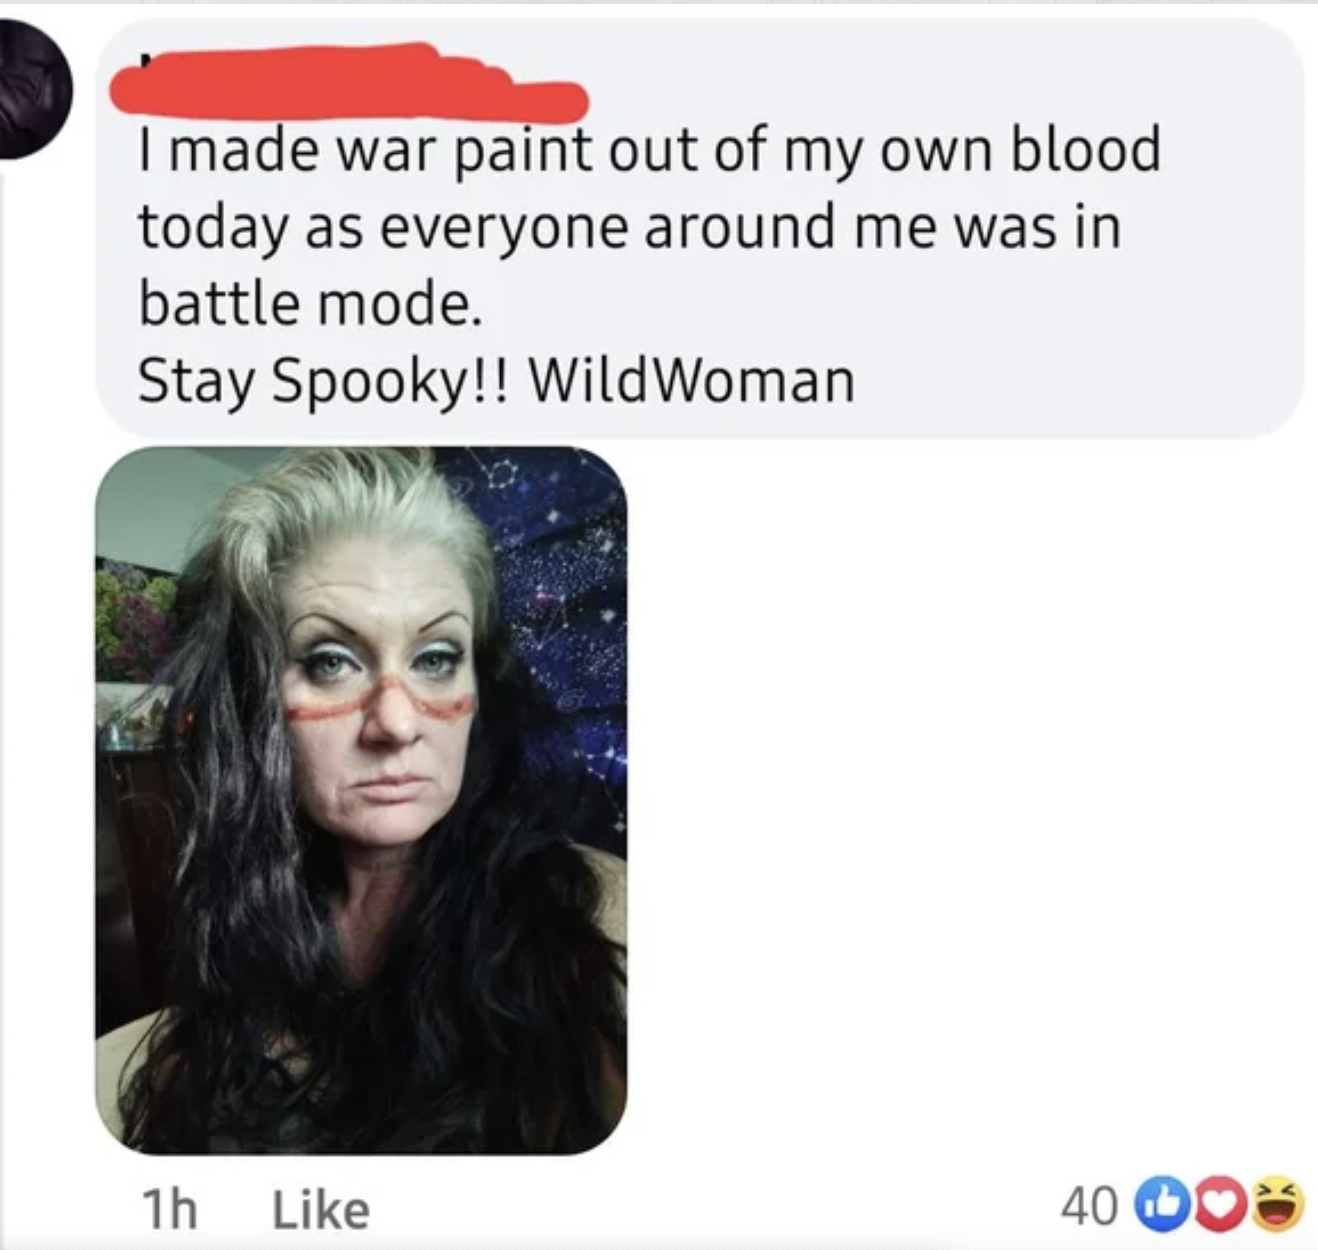 Crazy People of Facebook - media - I made war paint out of my own blood today as everyone around me was in battle mode. Stay Spooky!!